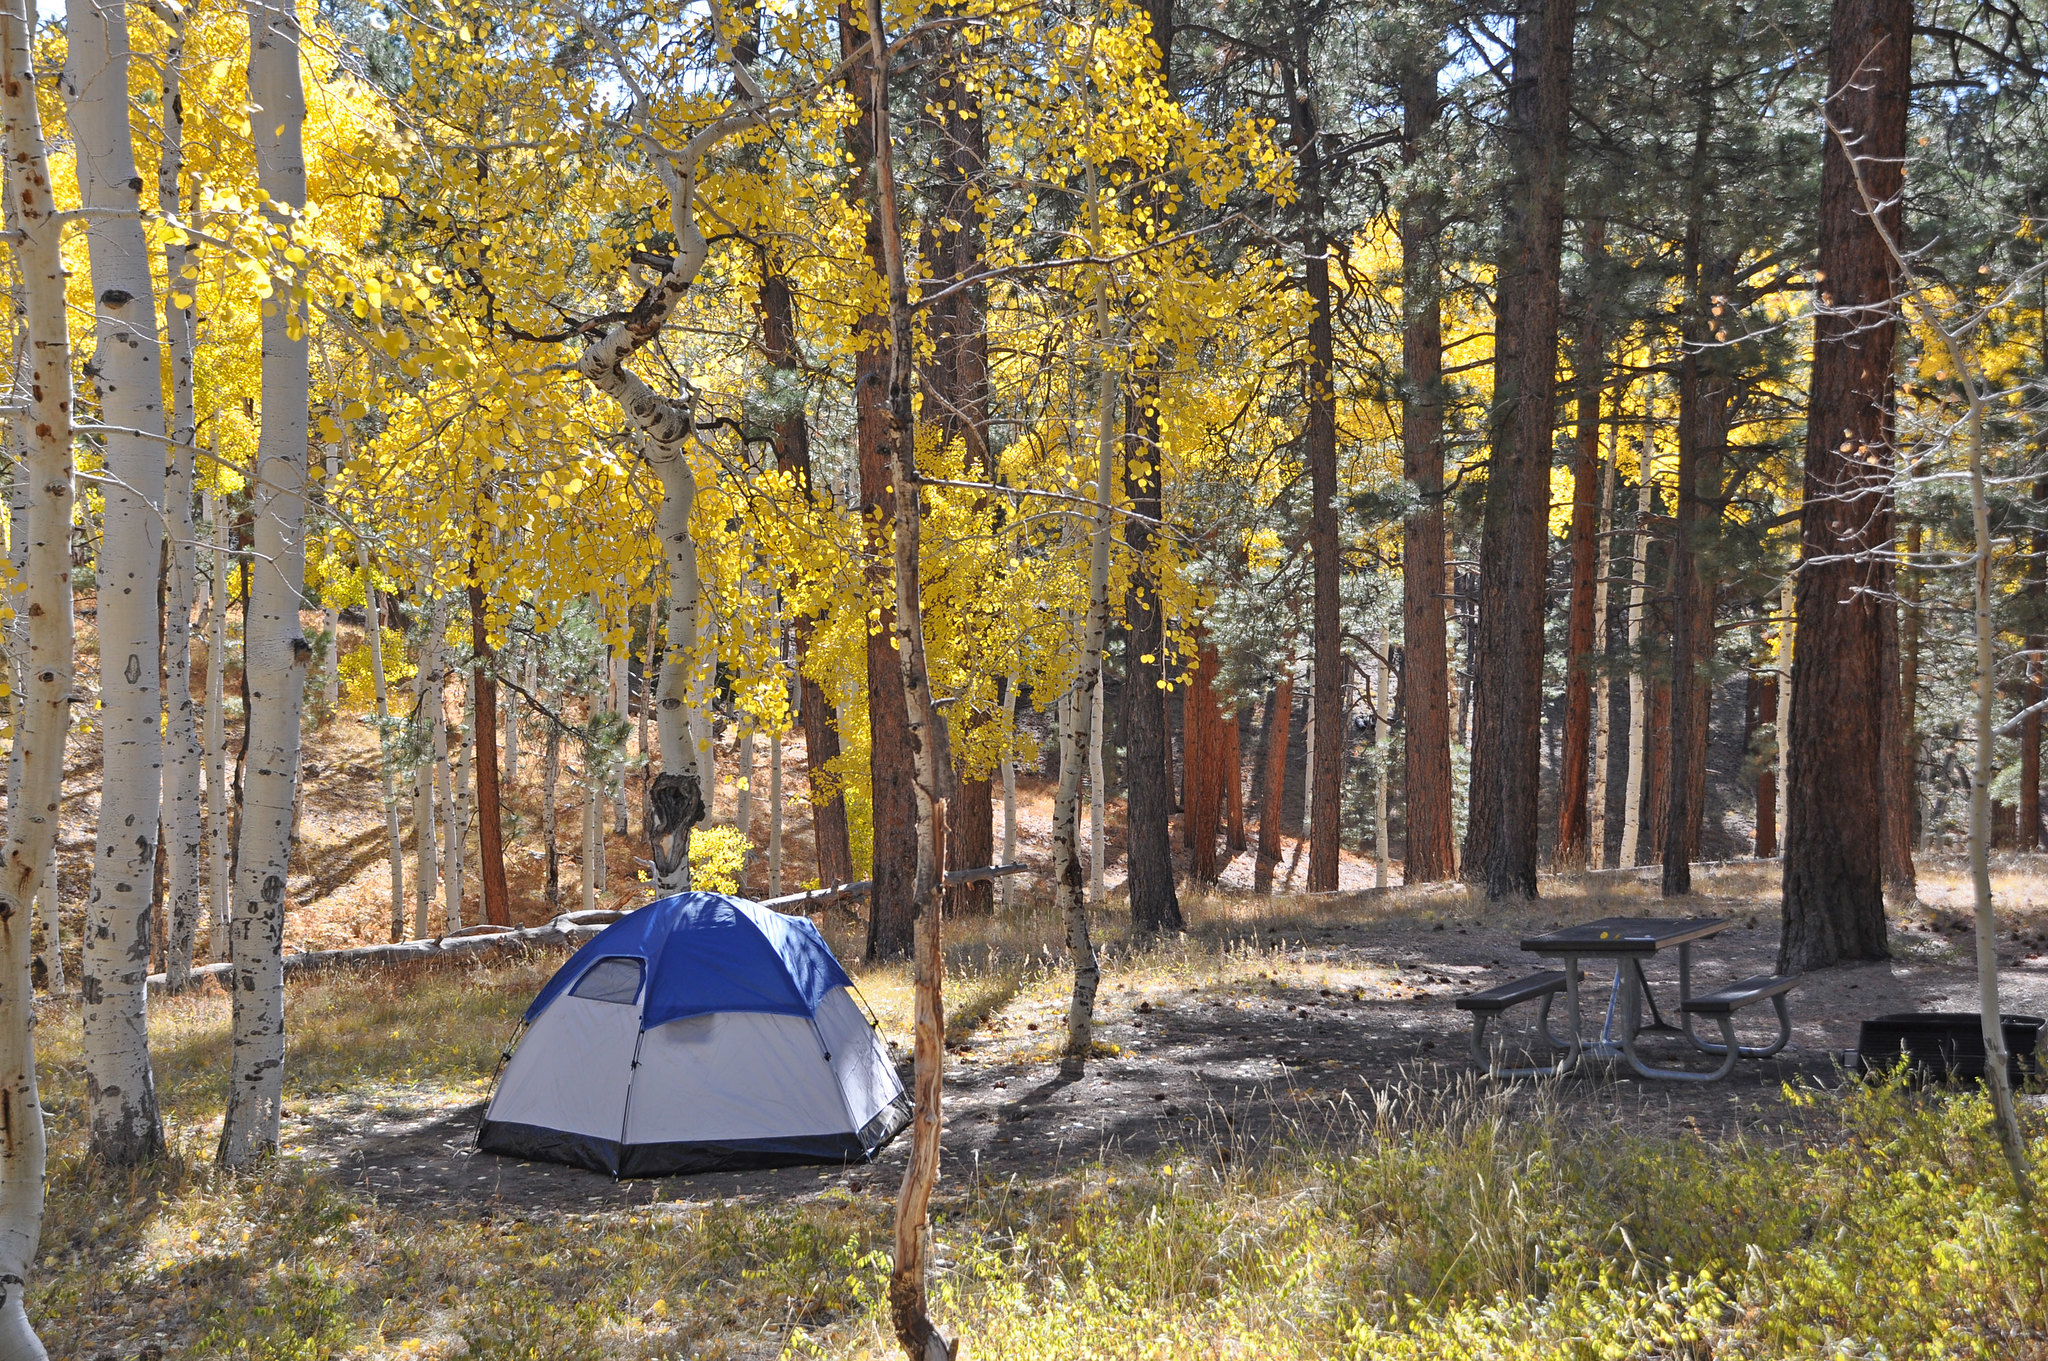 Fall colors in the North Rim Campground.  The North Rim Campground remains closed through October 15, 2020.